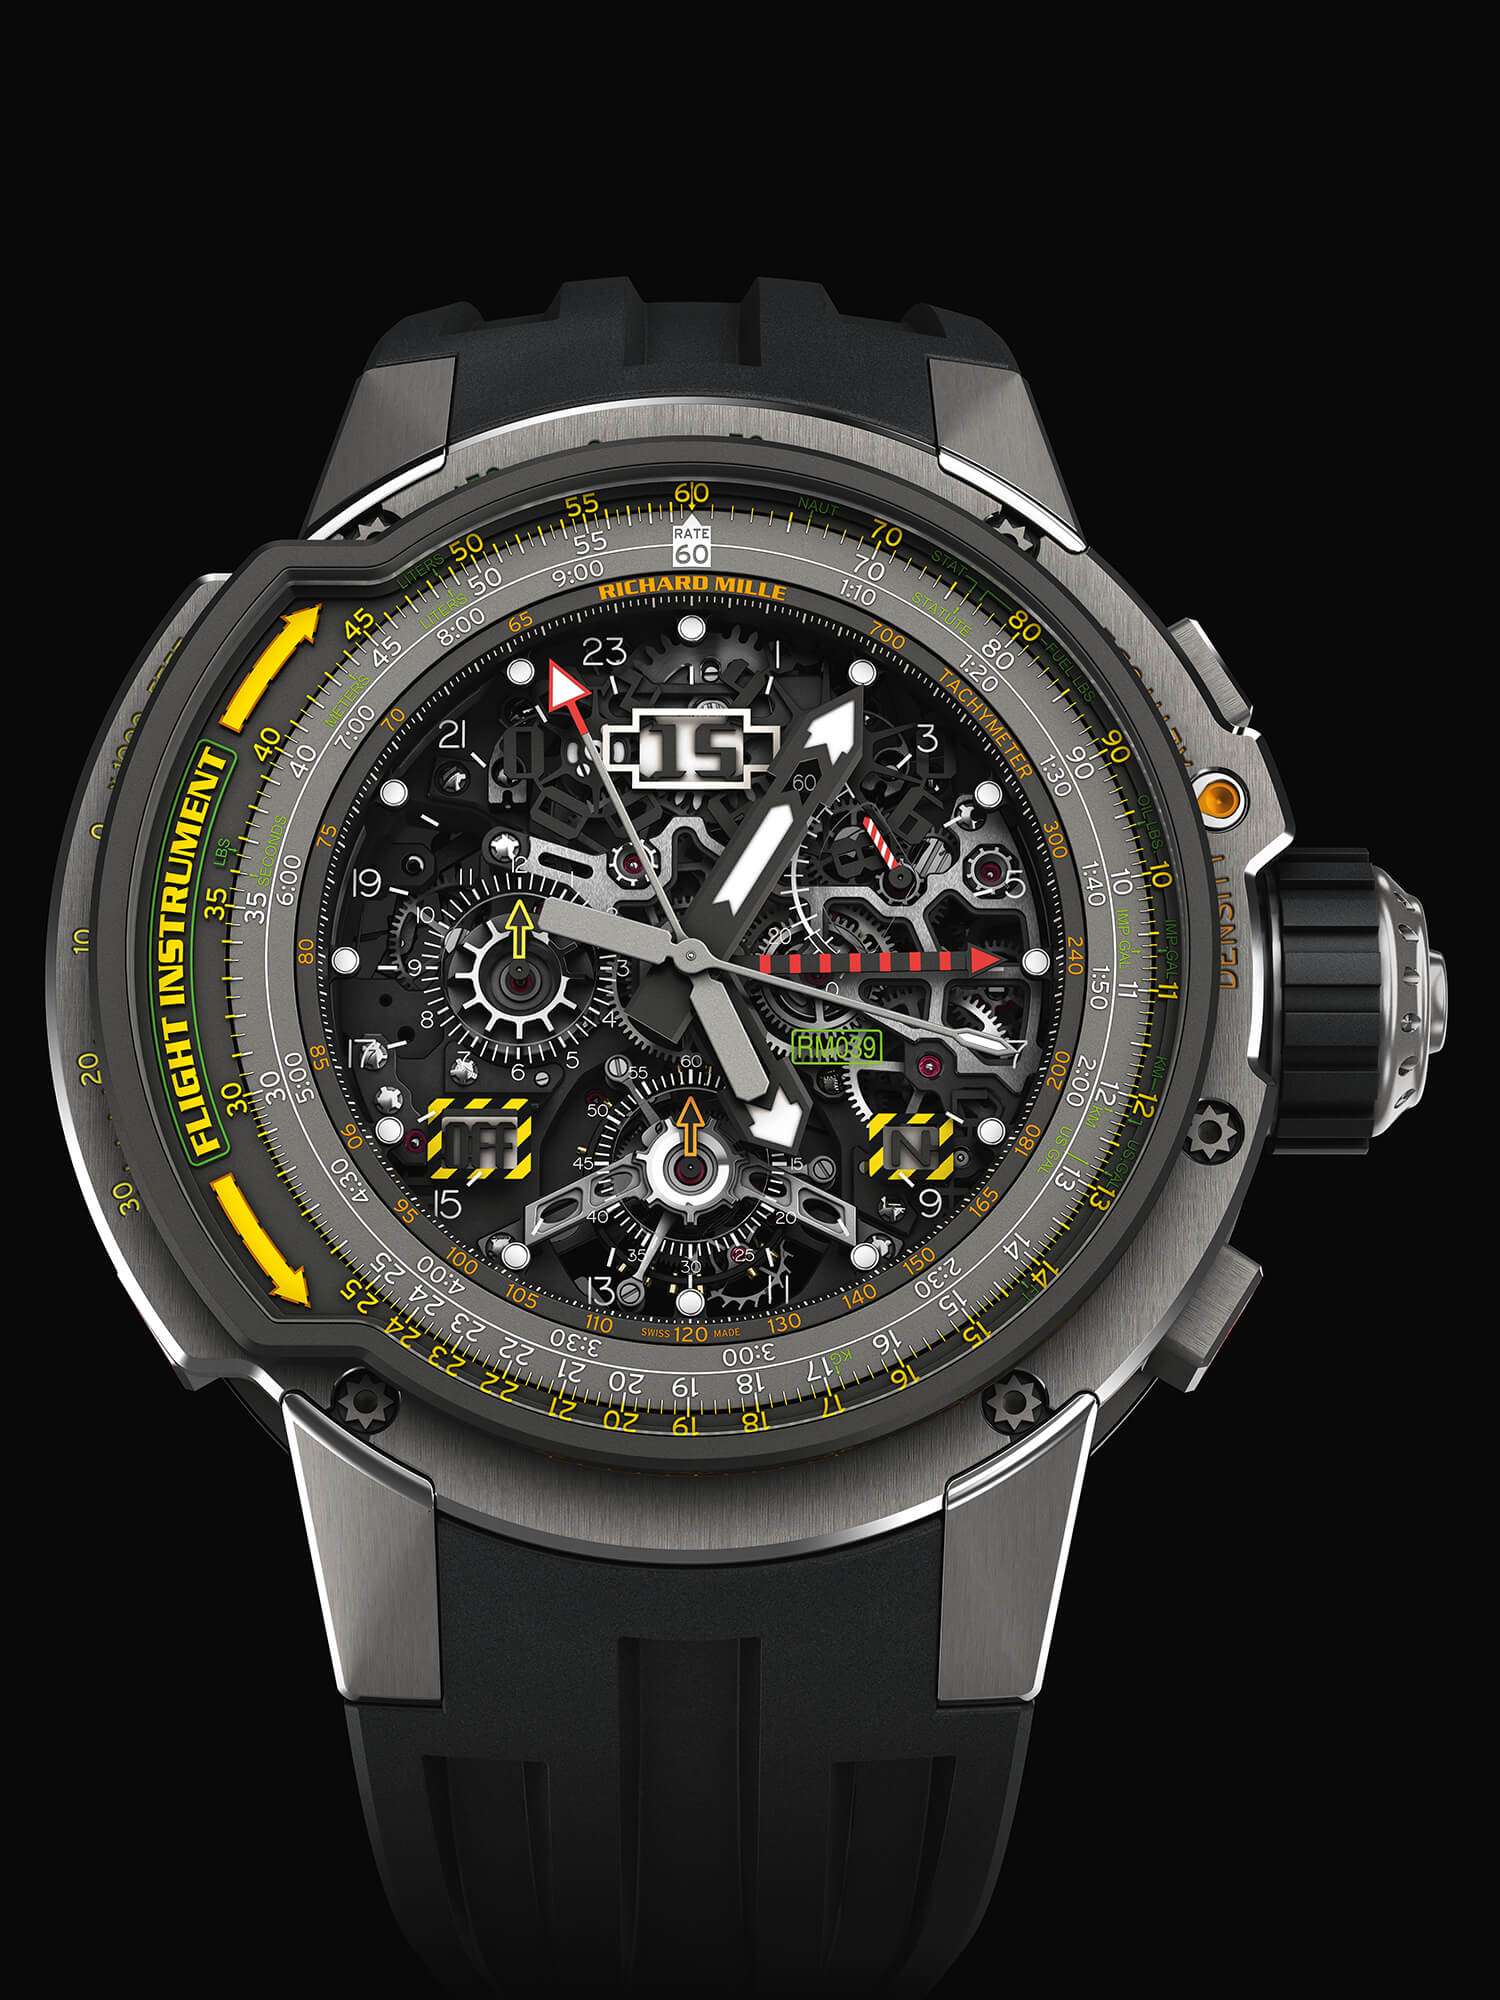 Richard Mille Rafael Nadal RM35-01 2019 service 2016 papers